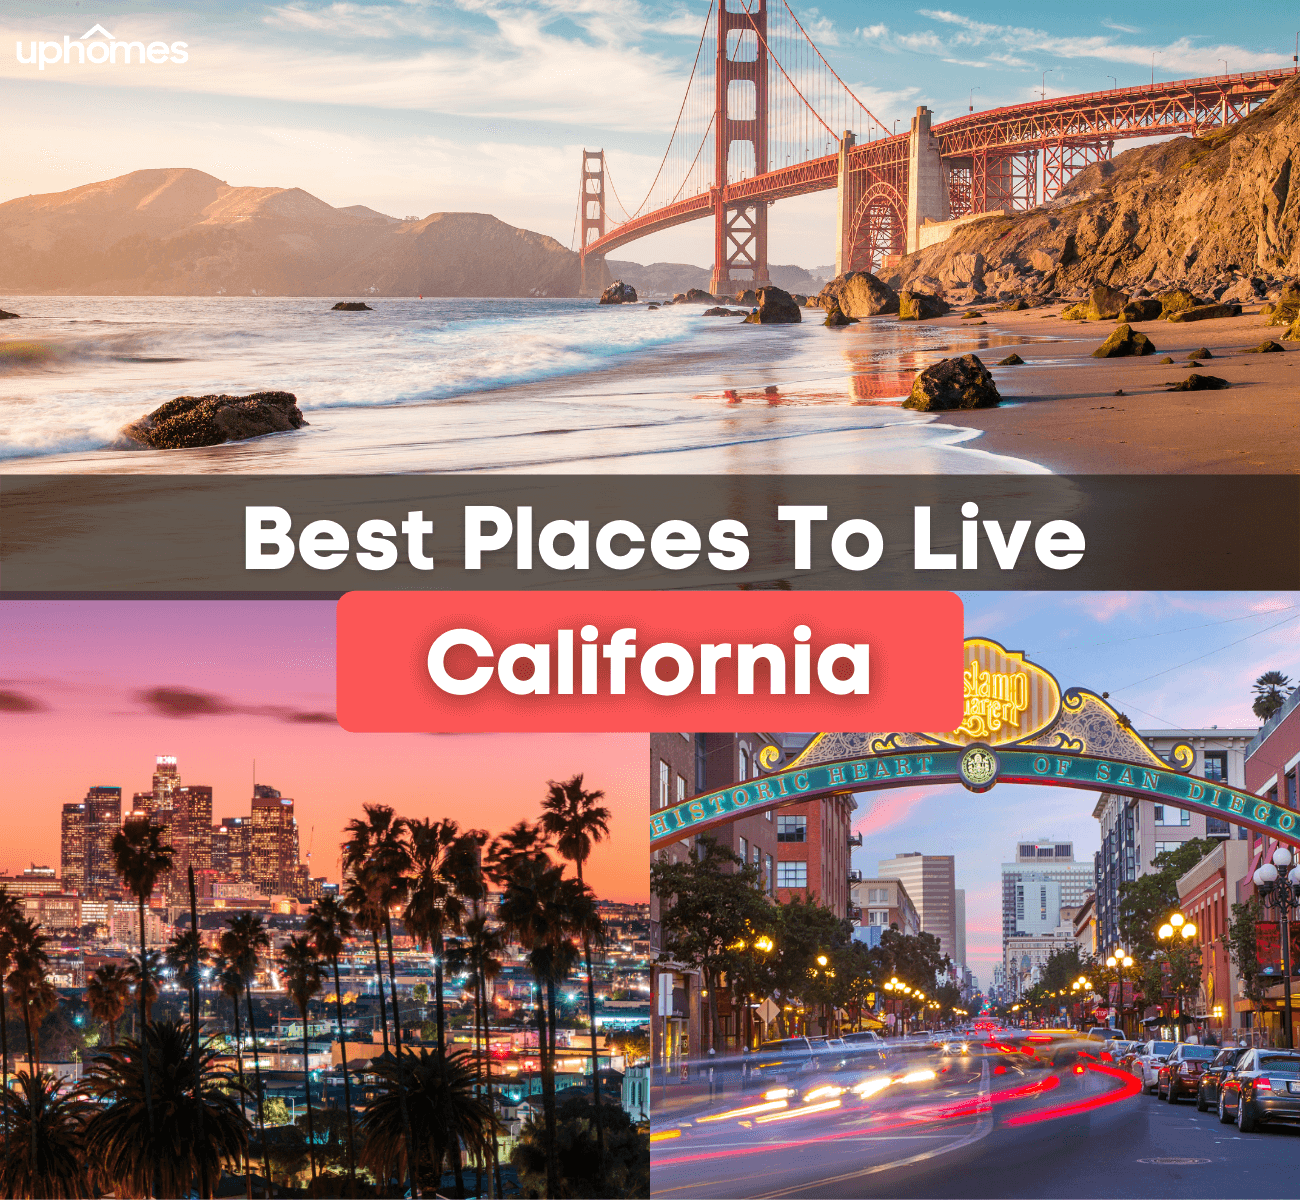 Best Places to Live in California - What are the best cities to live in California?